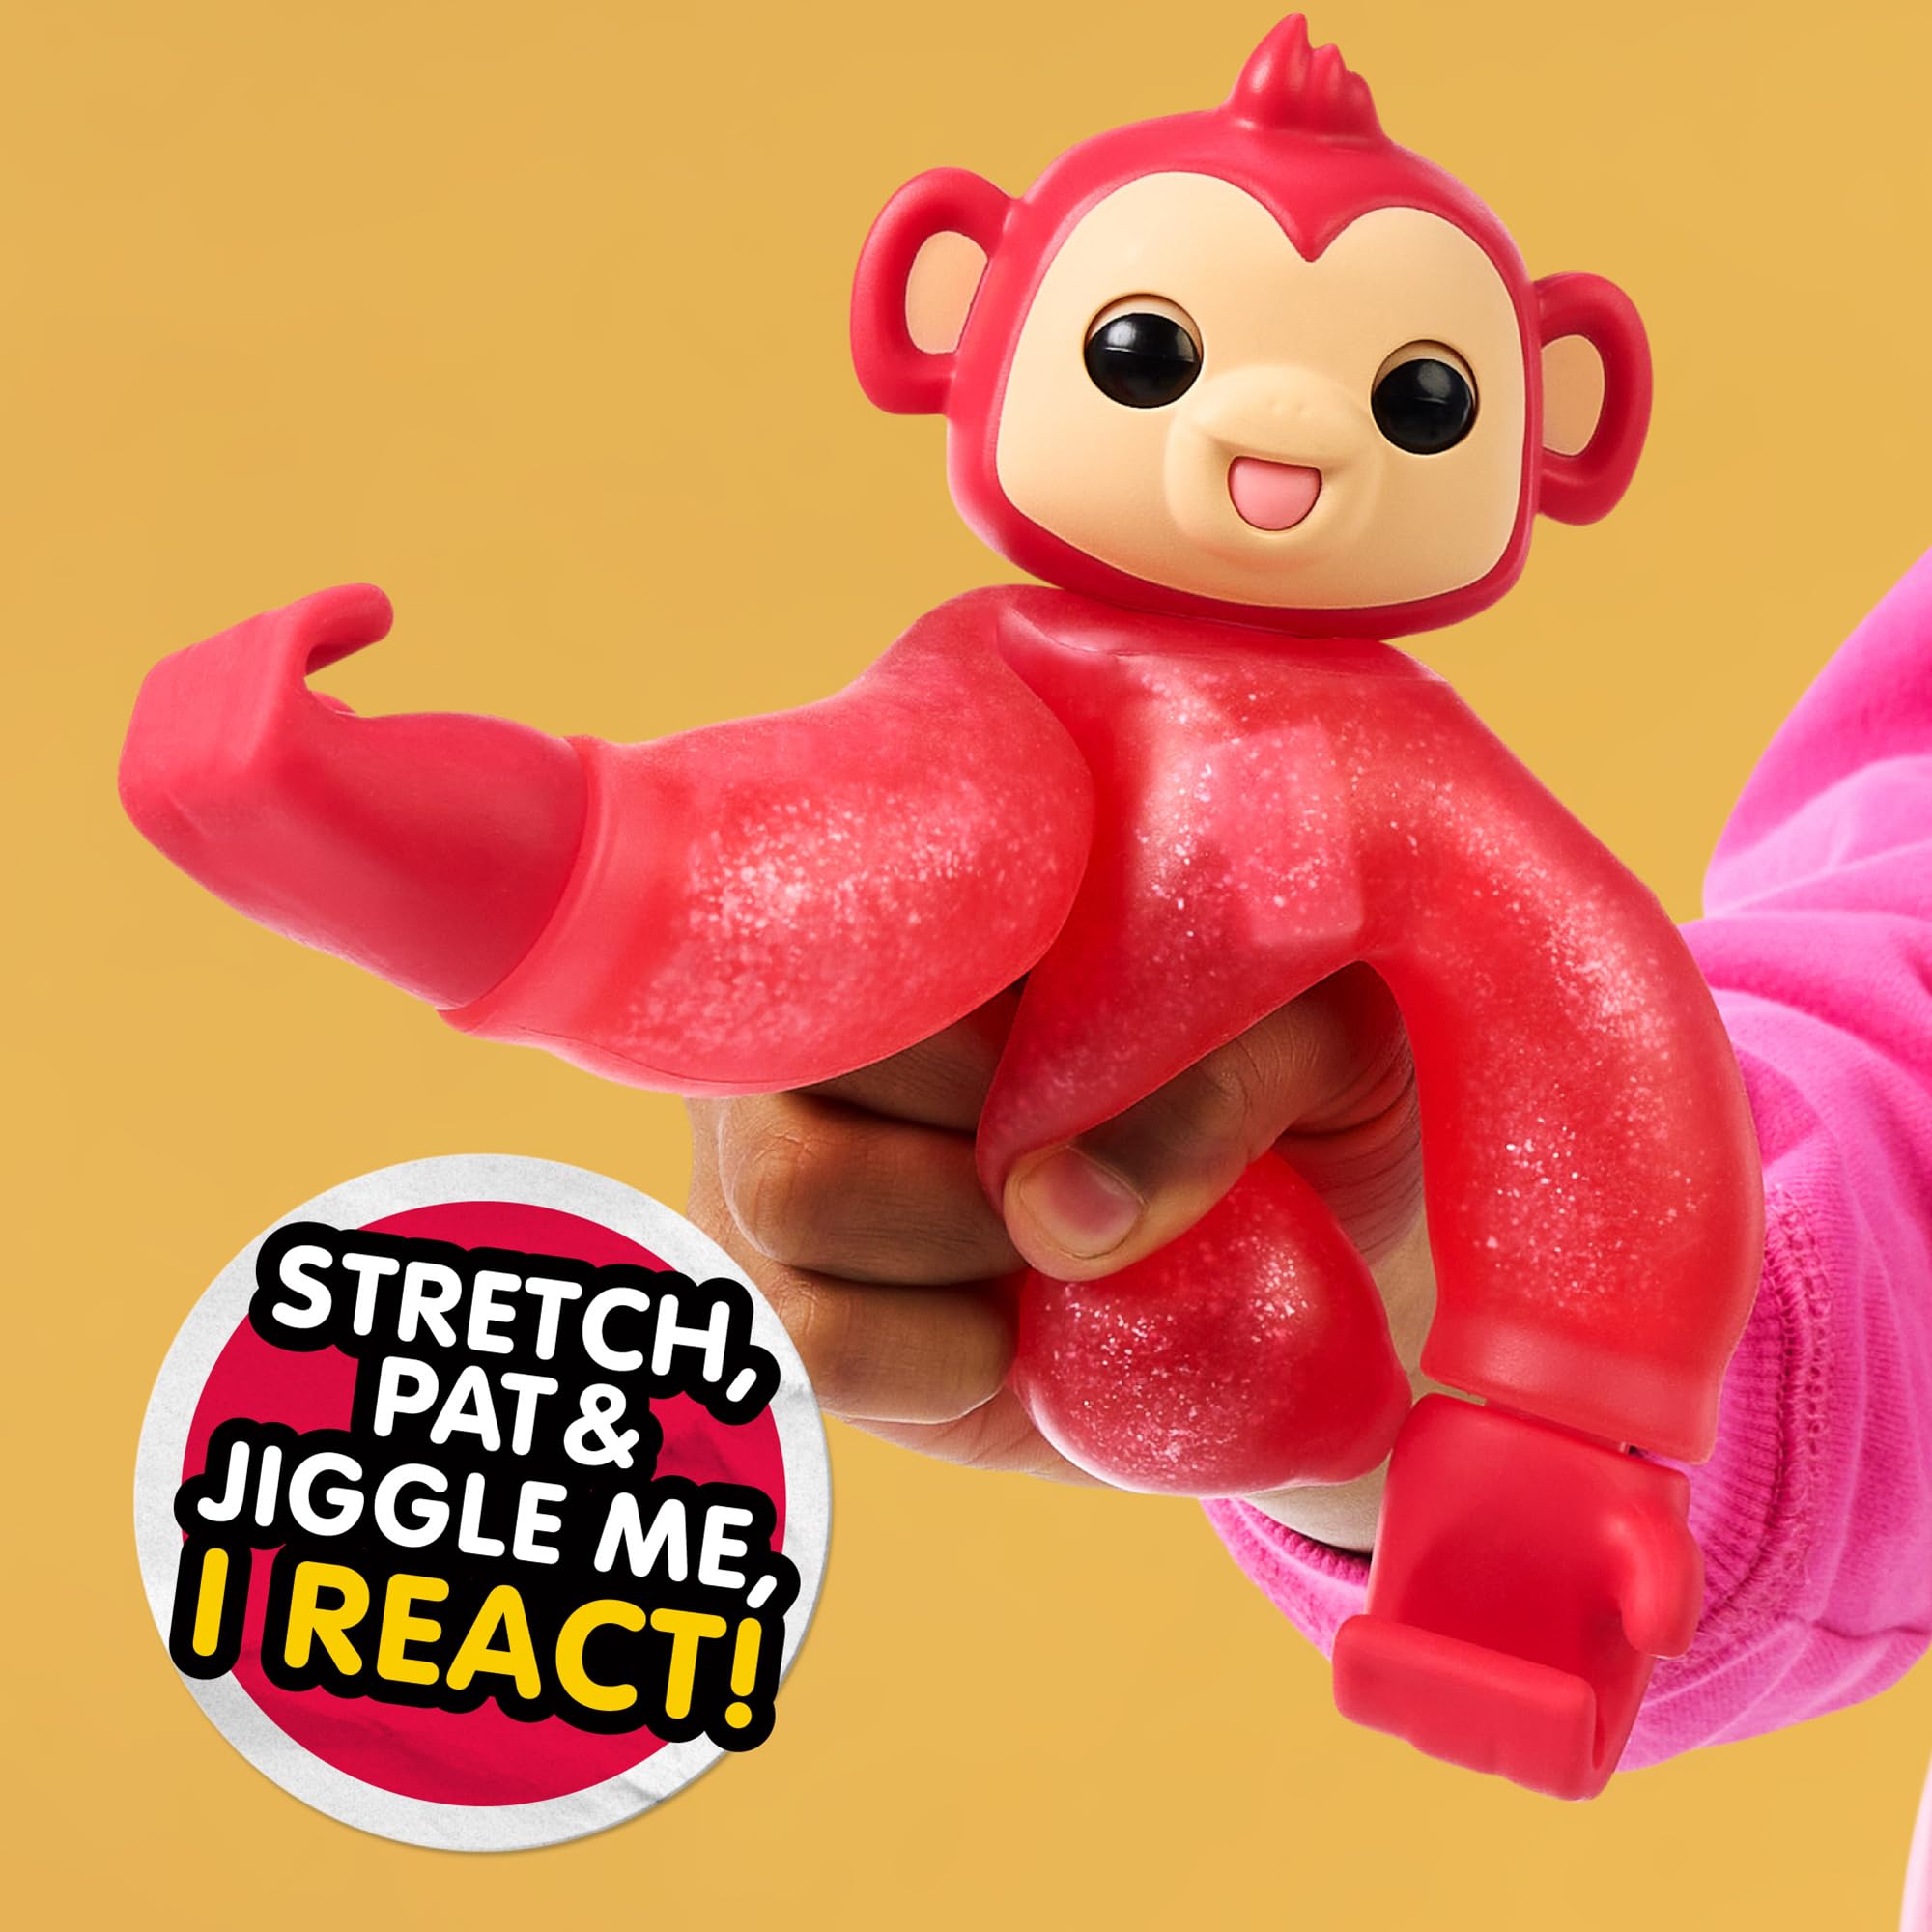 Little Live Pets Hug n' Hang Zoogooz - Mookie Monkey. an Interactive Electronic Squishy Stretchy Toy Pet with 70+ Sounds & Reactions. Stretch, Squish & Link Their Hands